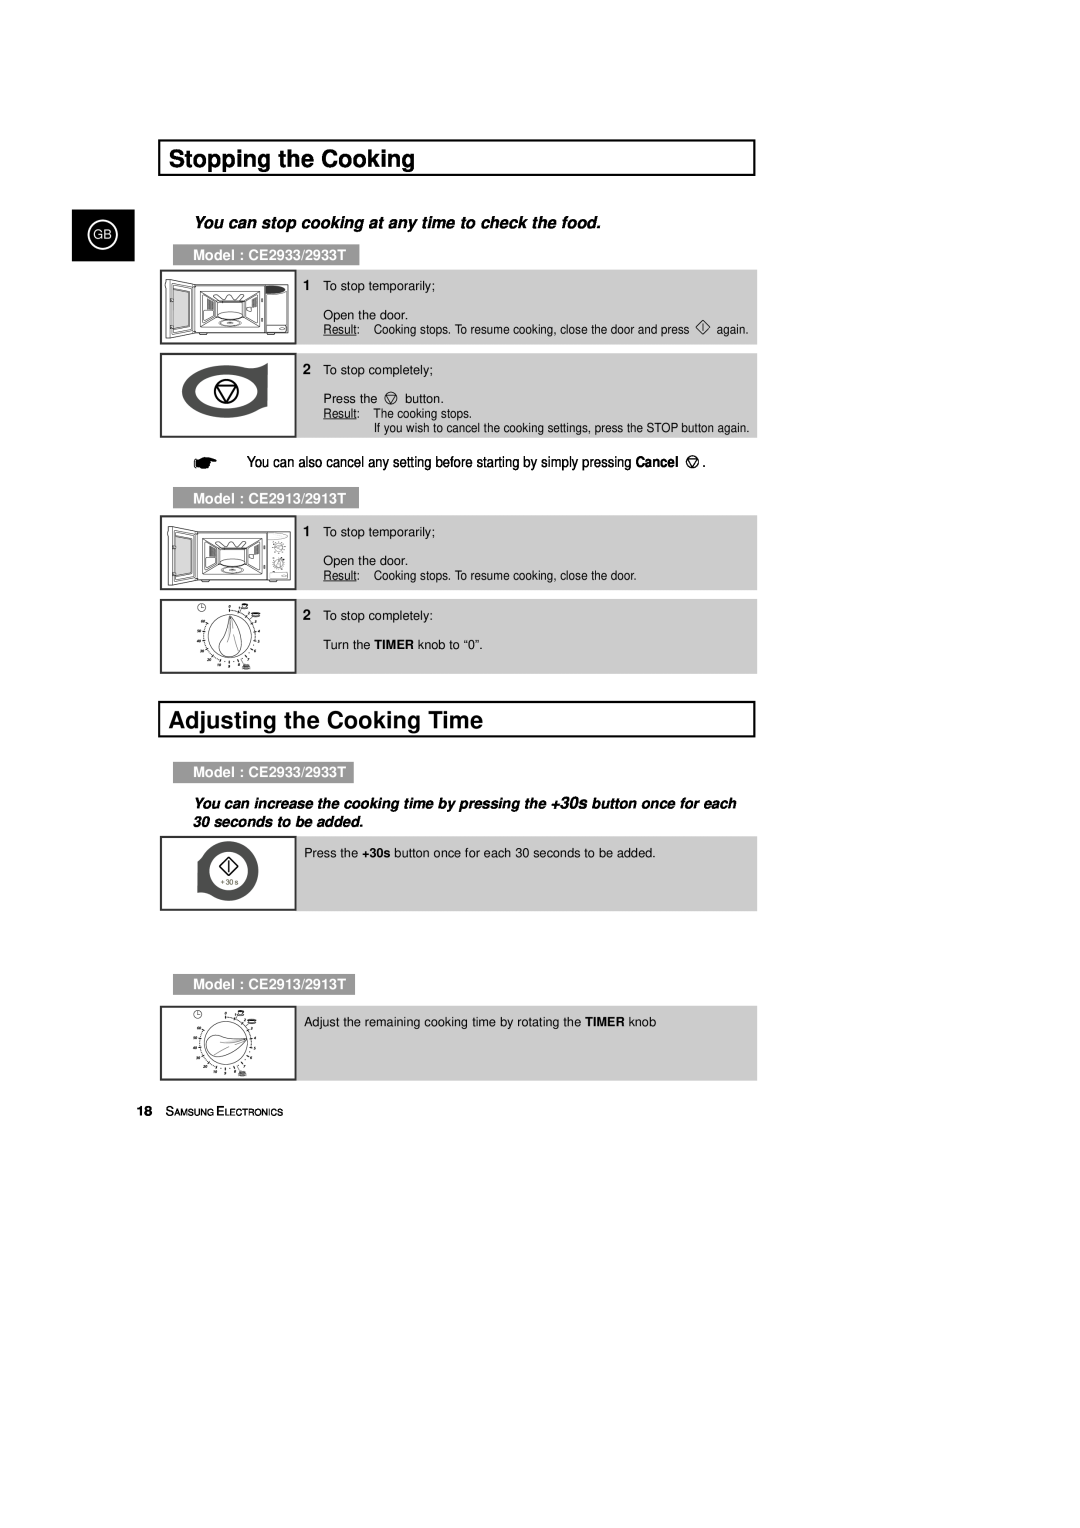 Samsung CE2933 manual Stopping the Cooking, Adjusting the Cooking Time, You can stop cooking at any time to check the food 